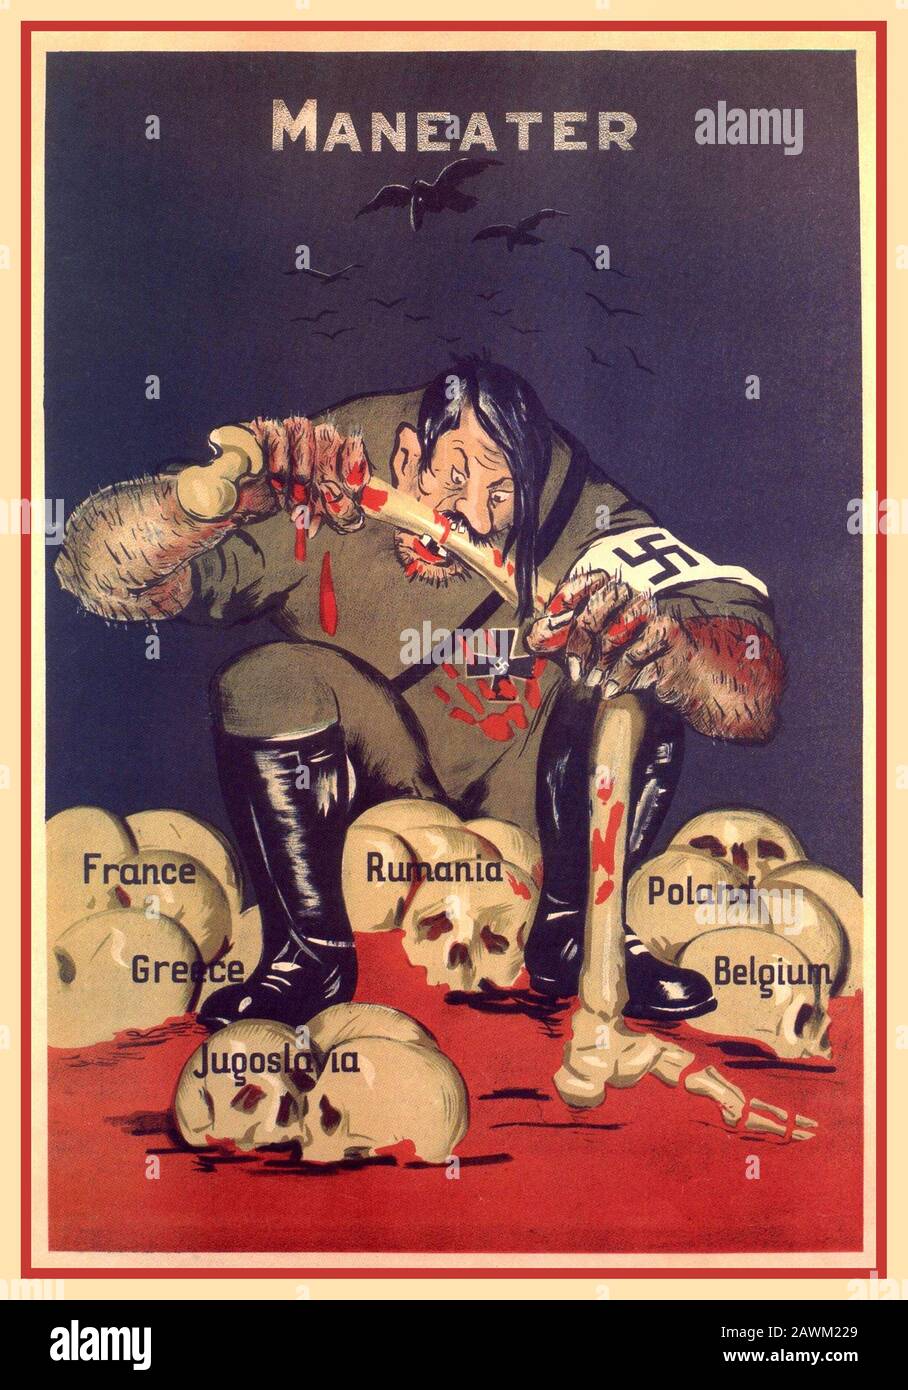 WW2 Adolf Hitler EUROPEAN INVADER OCCUPIER ‘MANEATER’ Illustration as a demonic swastika wearing Maneater - British UK Propaganda poster from 1942 depicting Hitler as a cannibal devouring the bones and skulls of France, Greece, Yugoslavia ,Rumania, Poland and Belgium countries across continental Europe. World War II Second World War WW2 Propaganda Poster Stock Photo